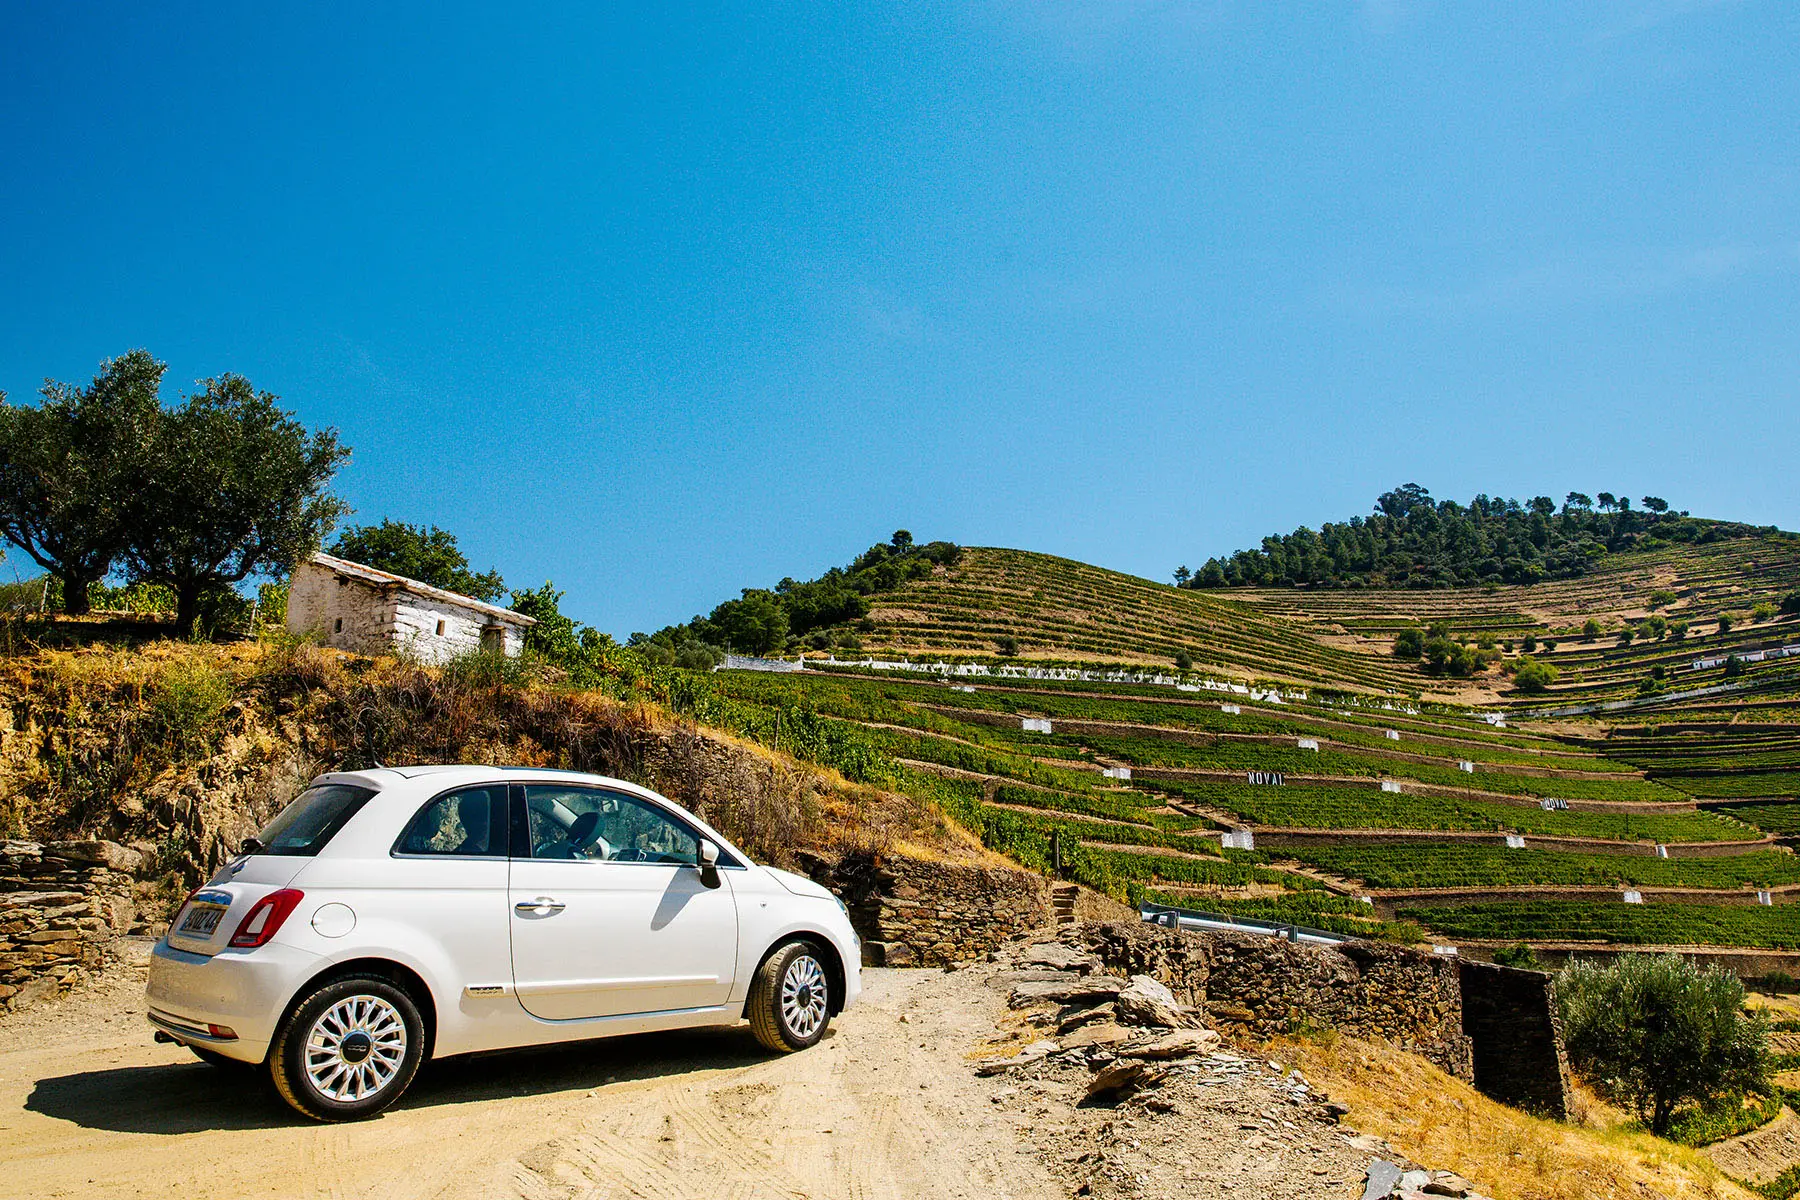 A parked car in rural Douro Valley in Portugal